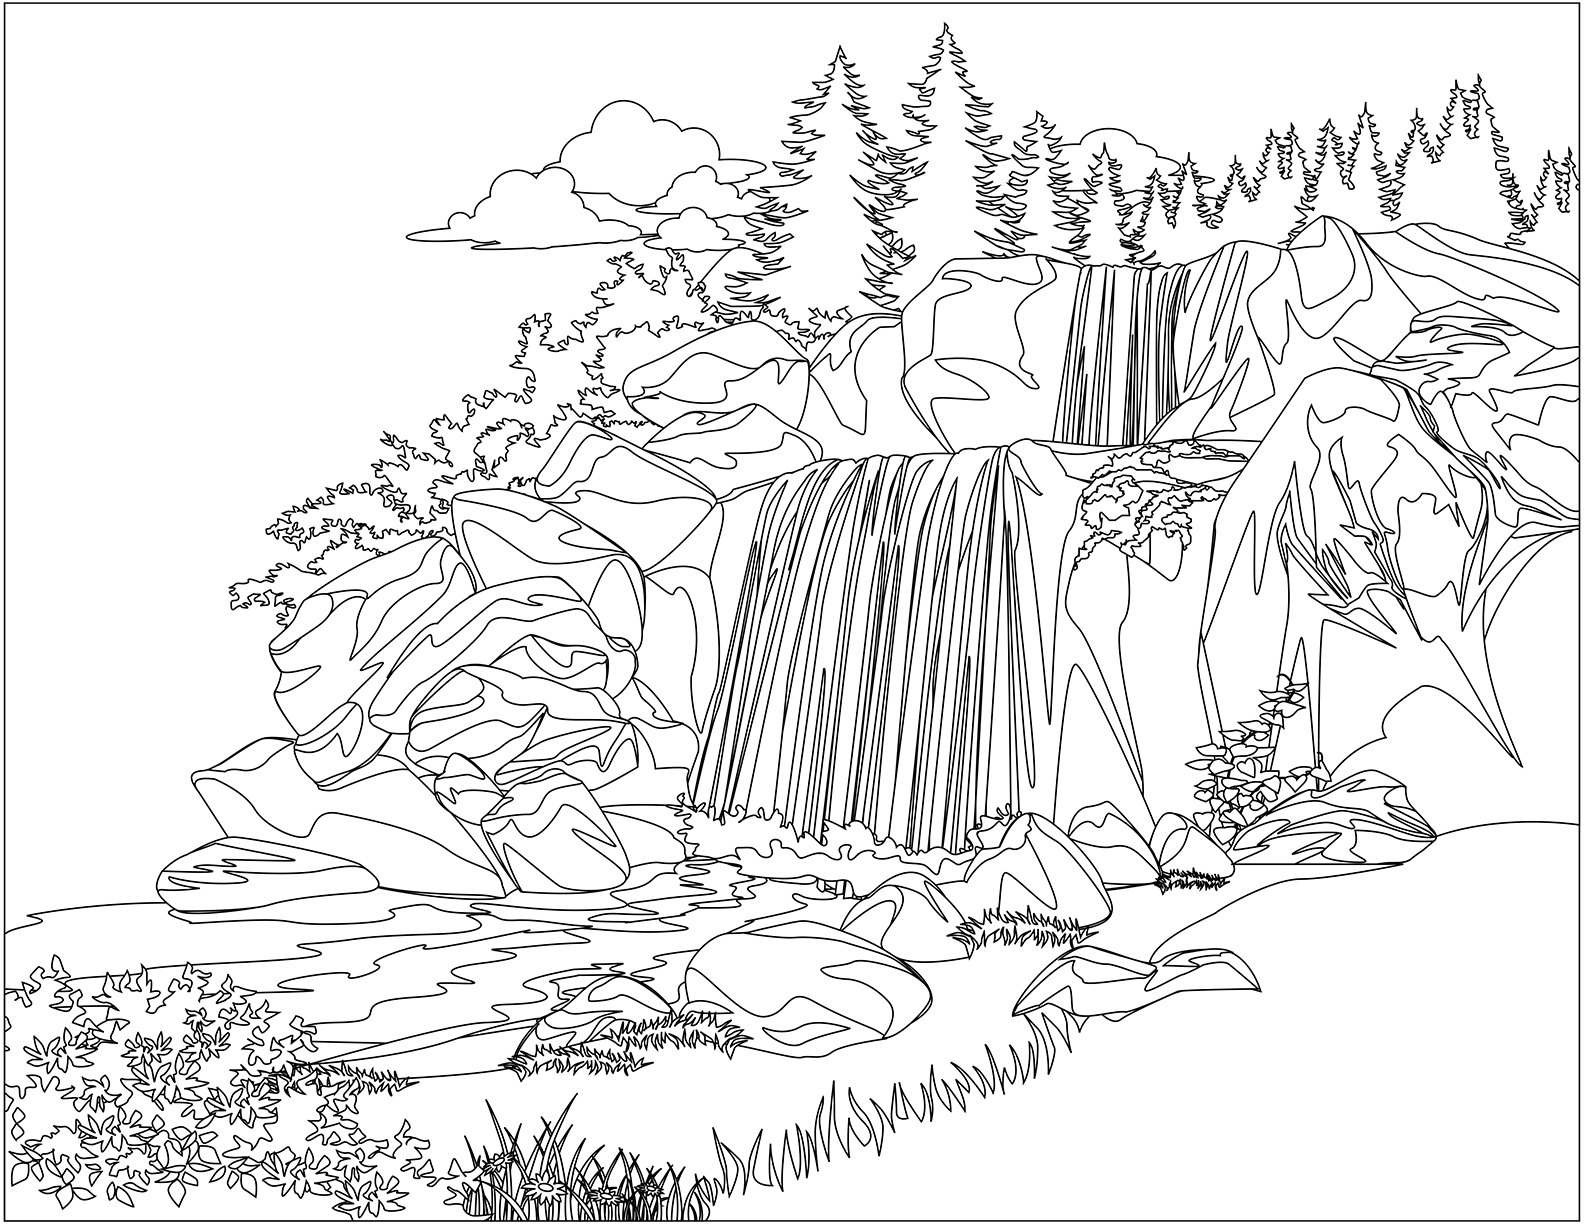 Waterfall Nature Coloring Pages For Adults - Berbagi Ilmu ...